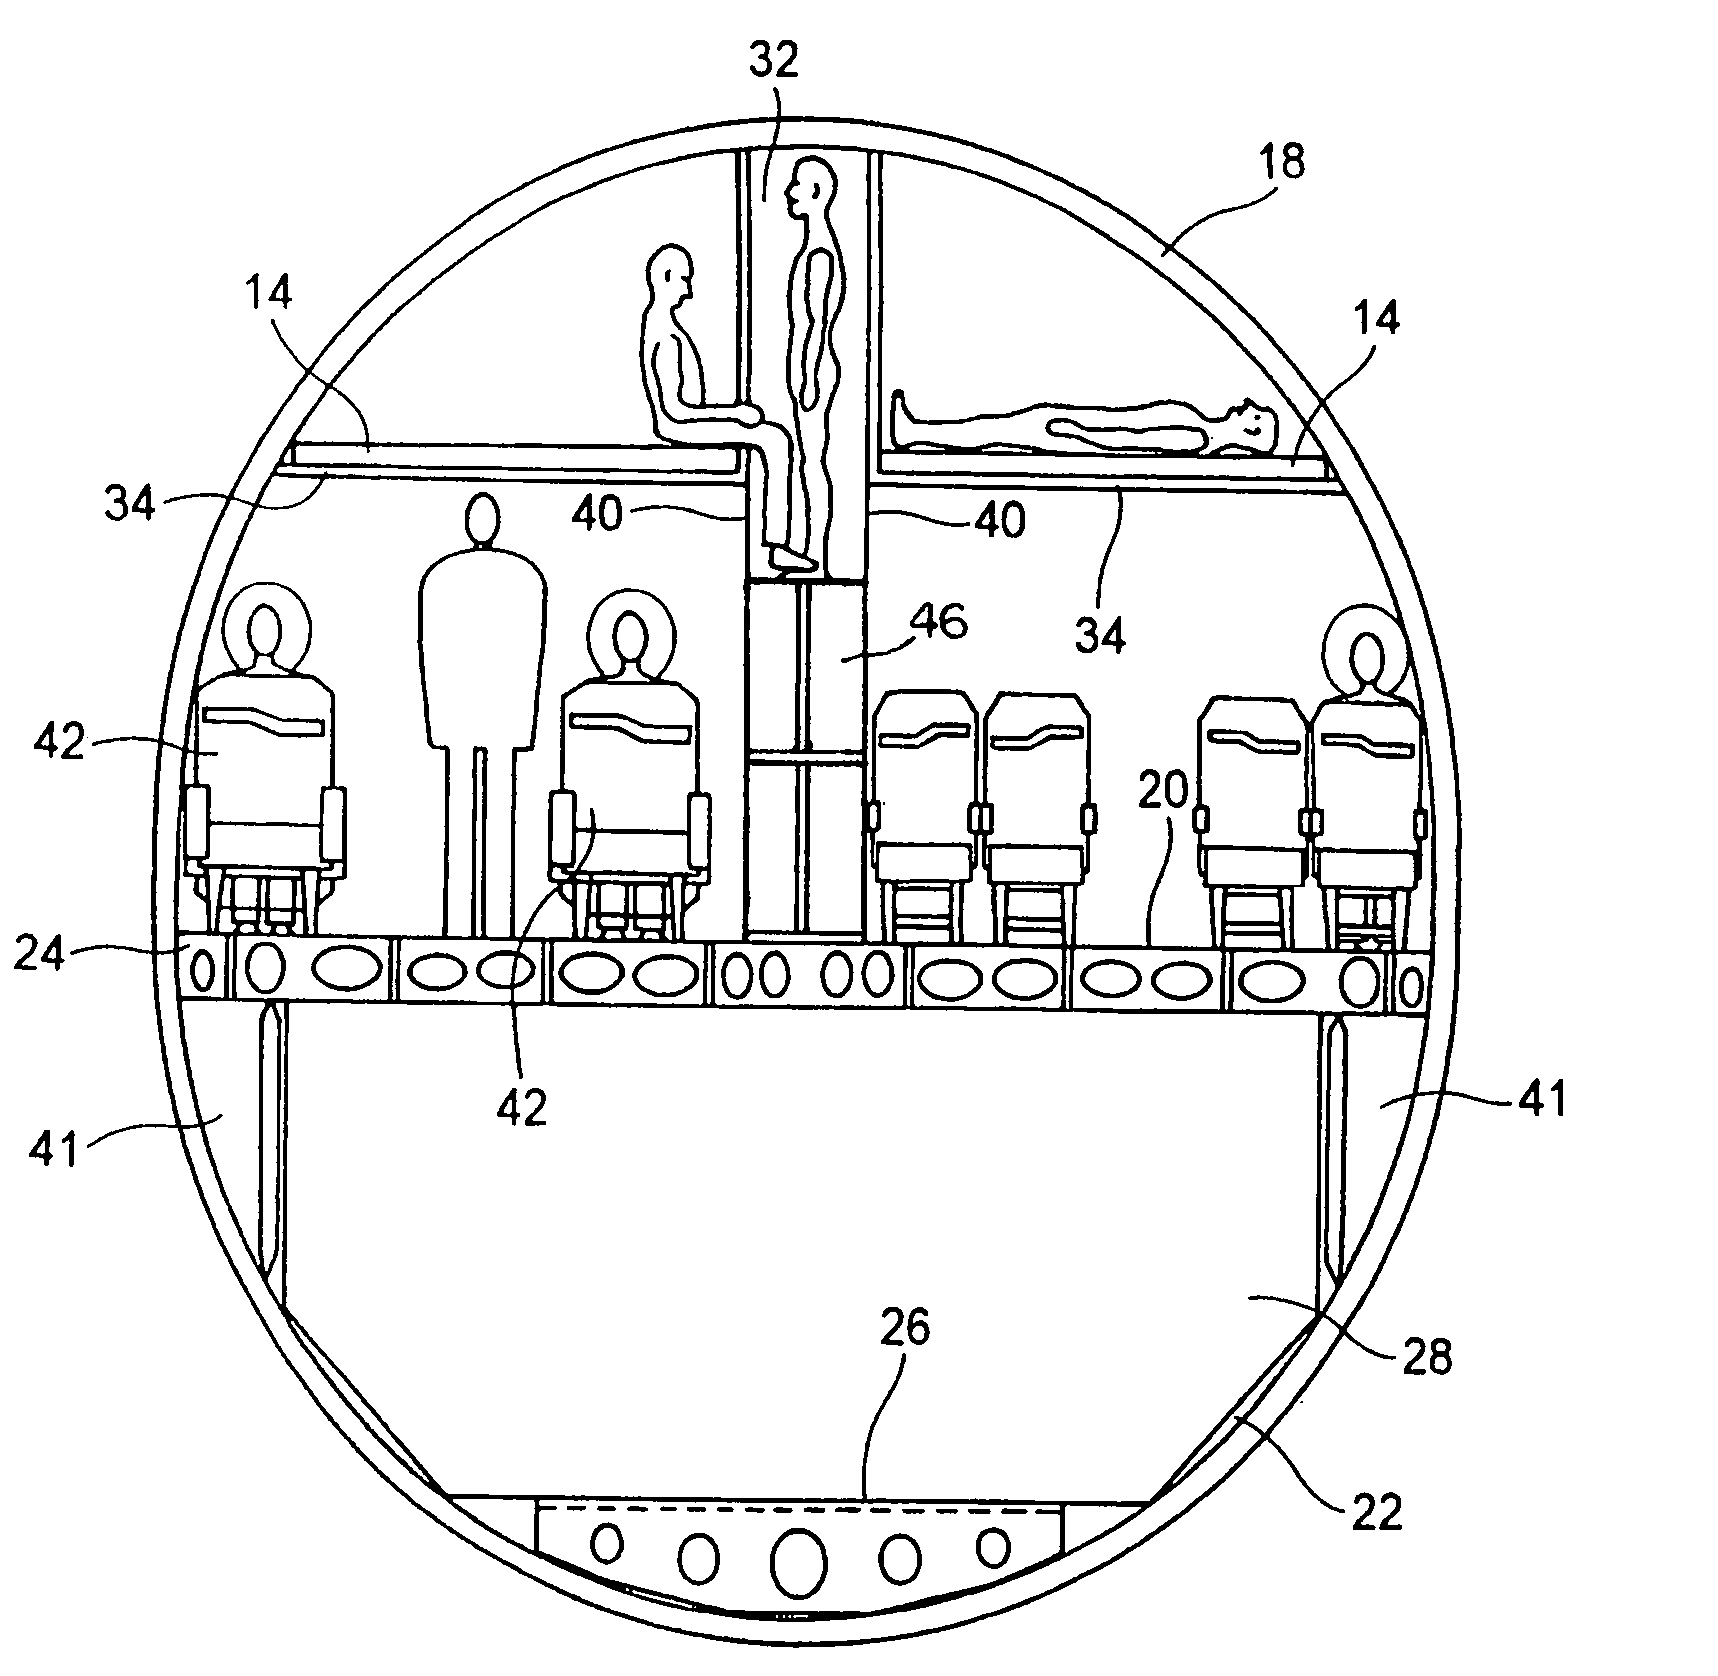 Layout of the top part of an aircraft cabin